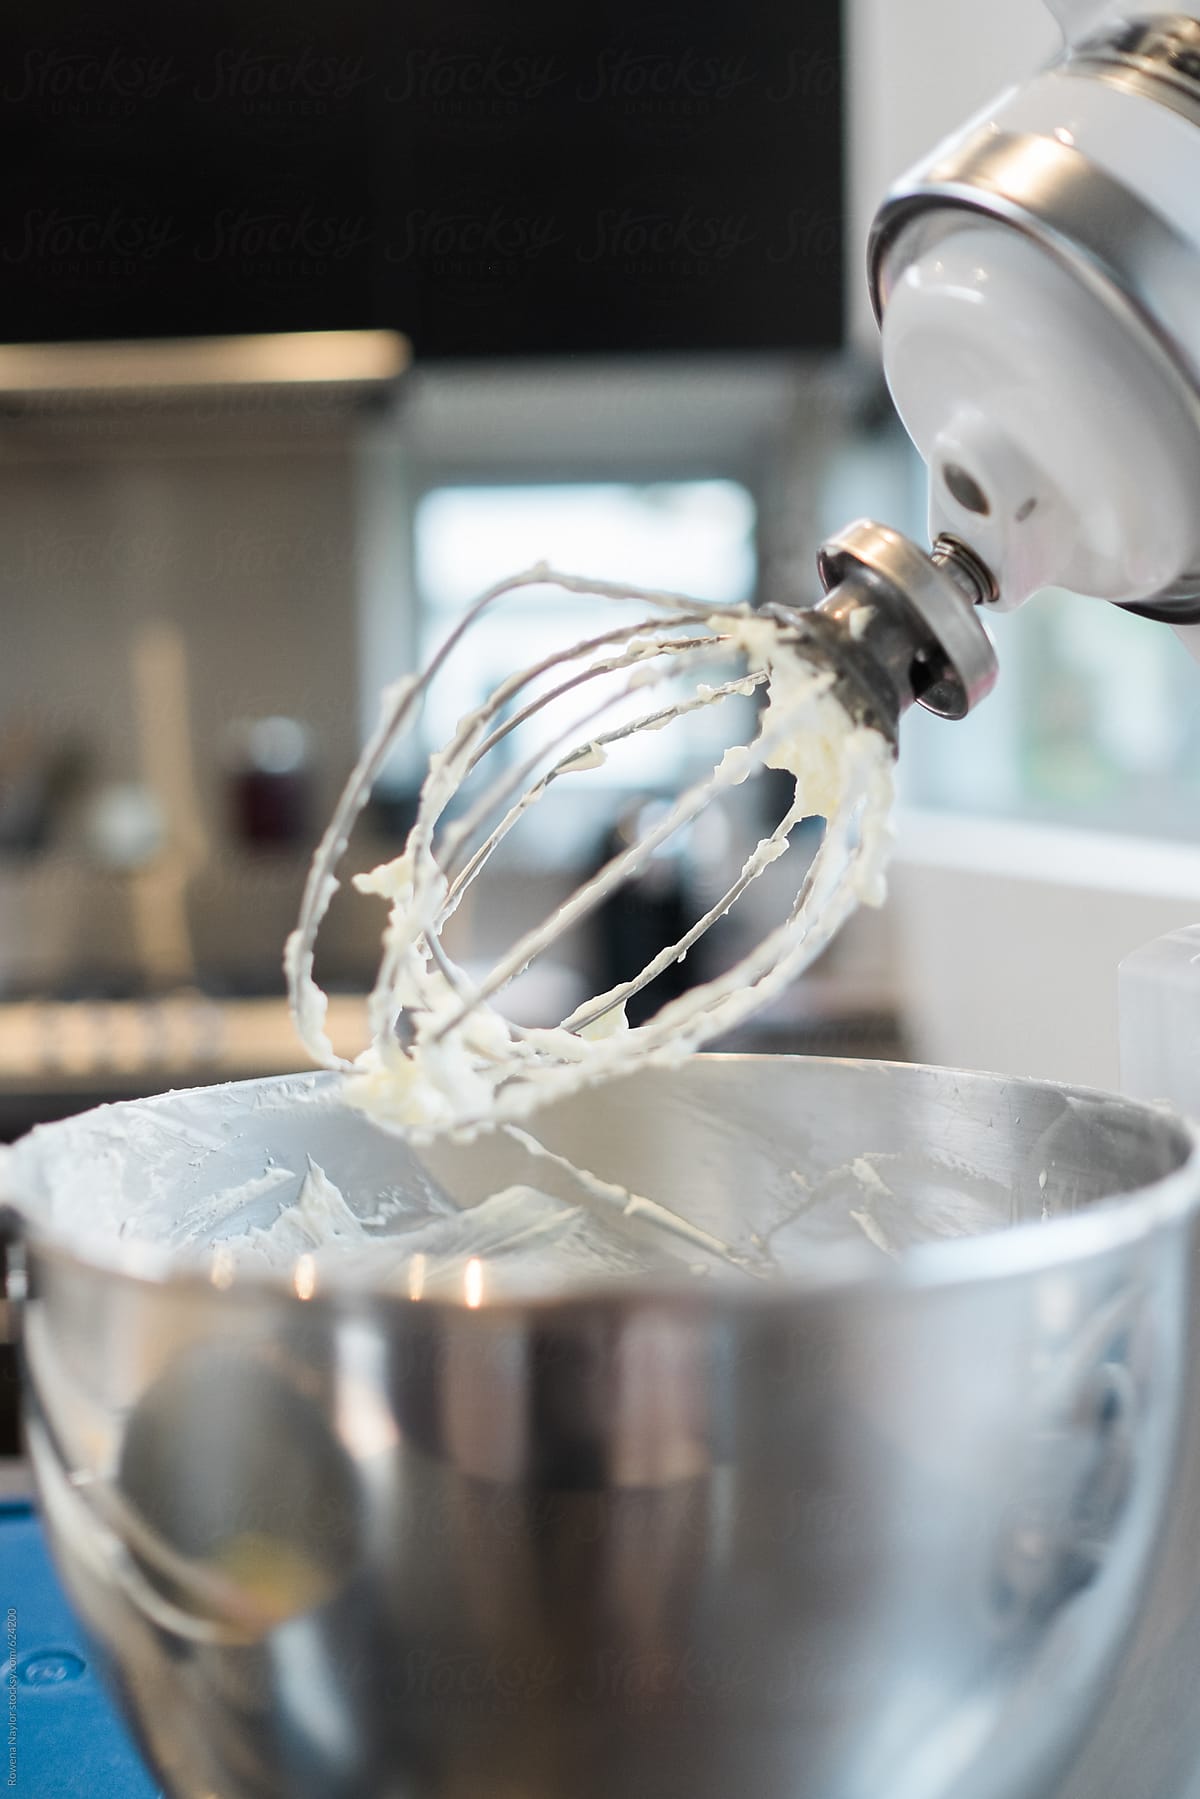 Whipping cream in a mixer